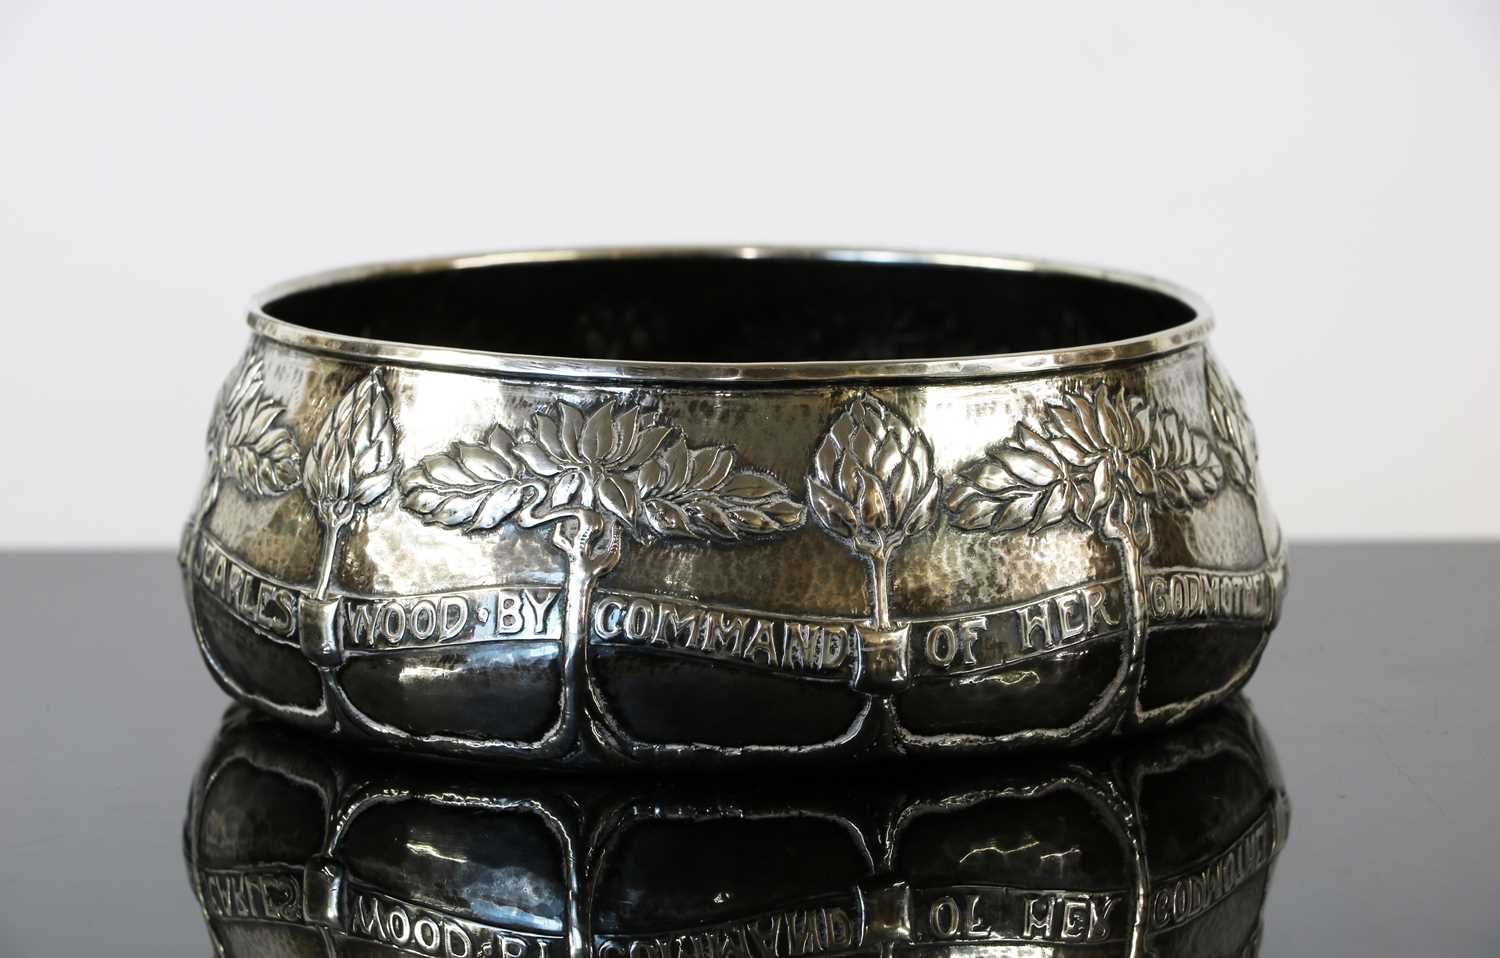 Lot 37 - An Arts and Crafts silver christening bowl